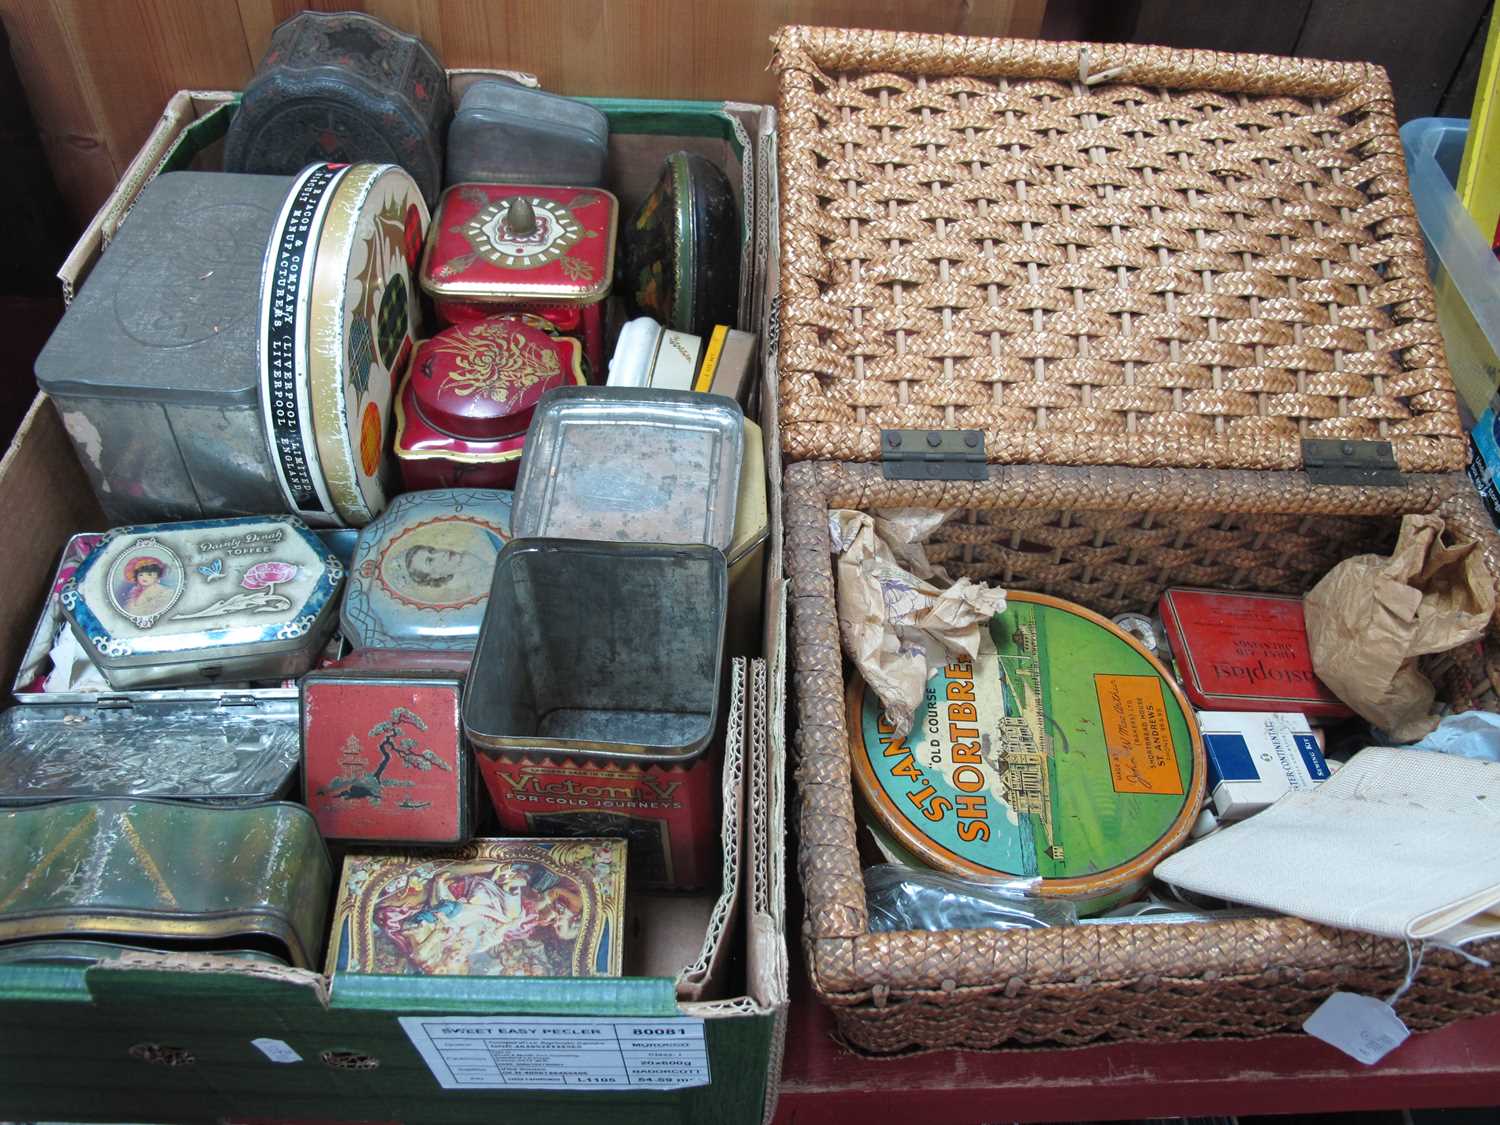 Tins - Ovaltine, Rowntree and others, needlework items and basket